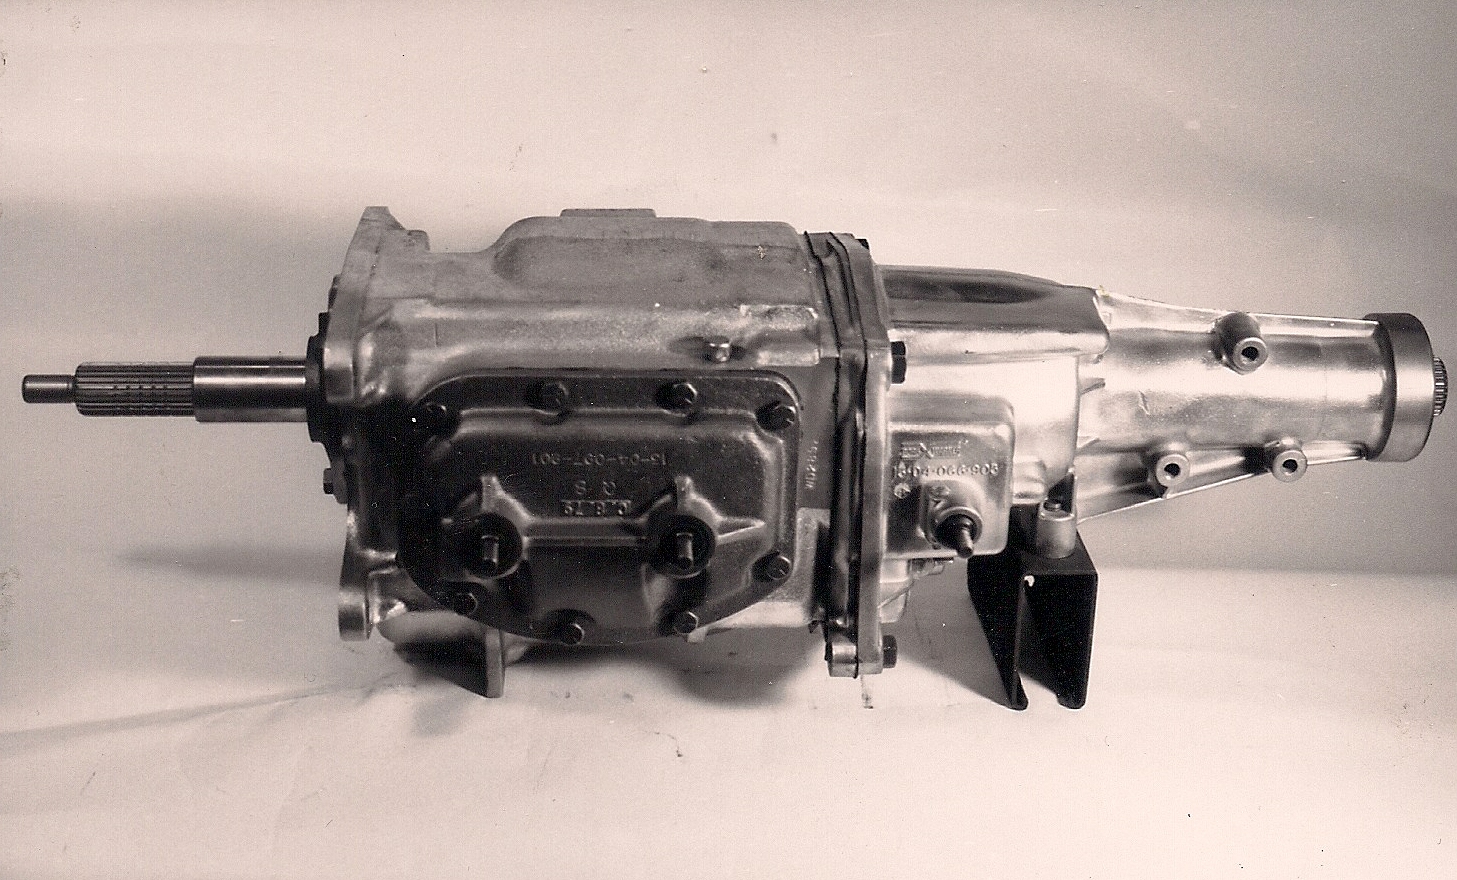 Typical Muncie 4-speed, driver’s side